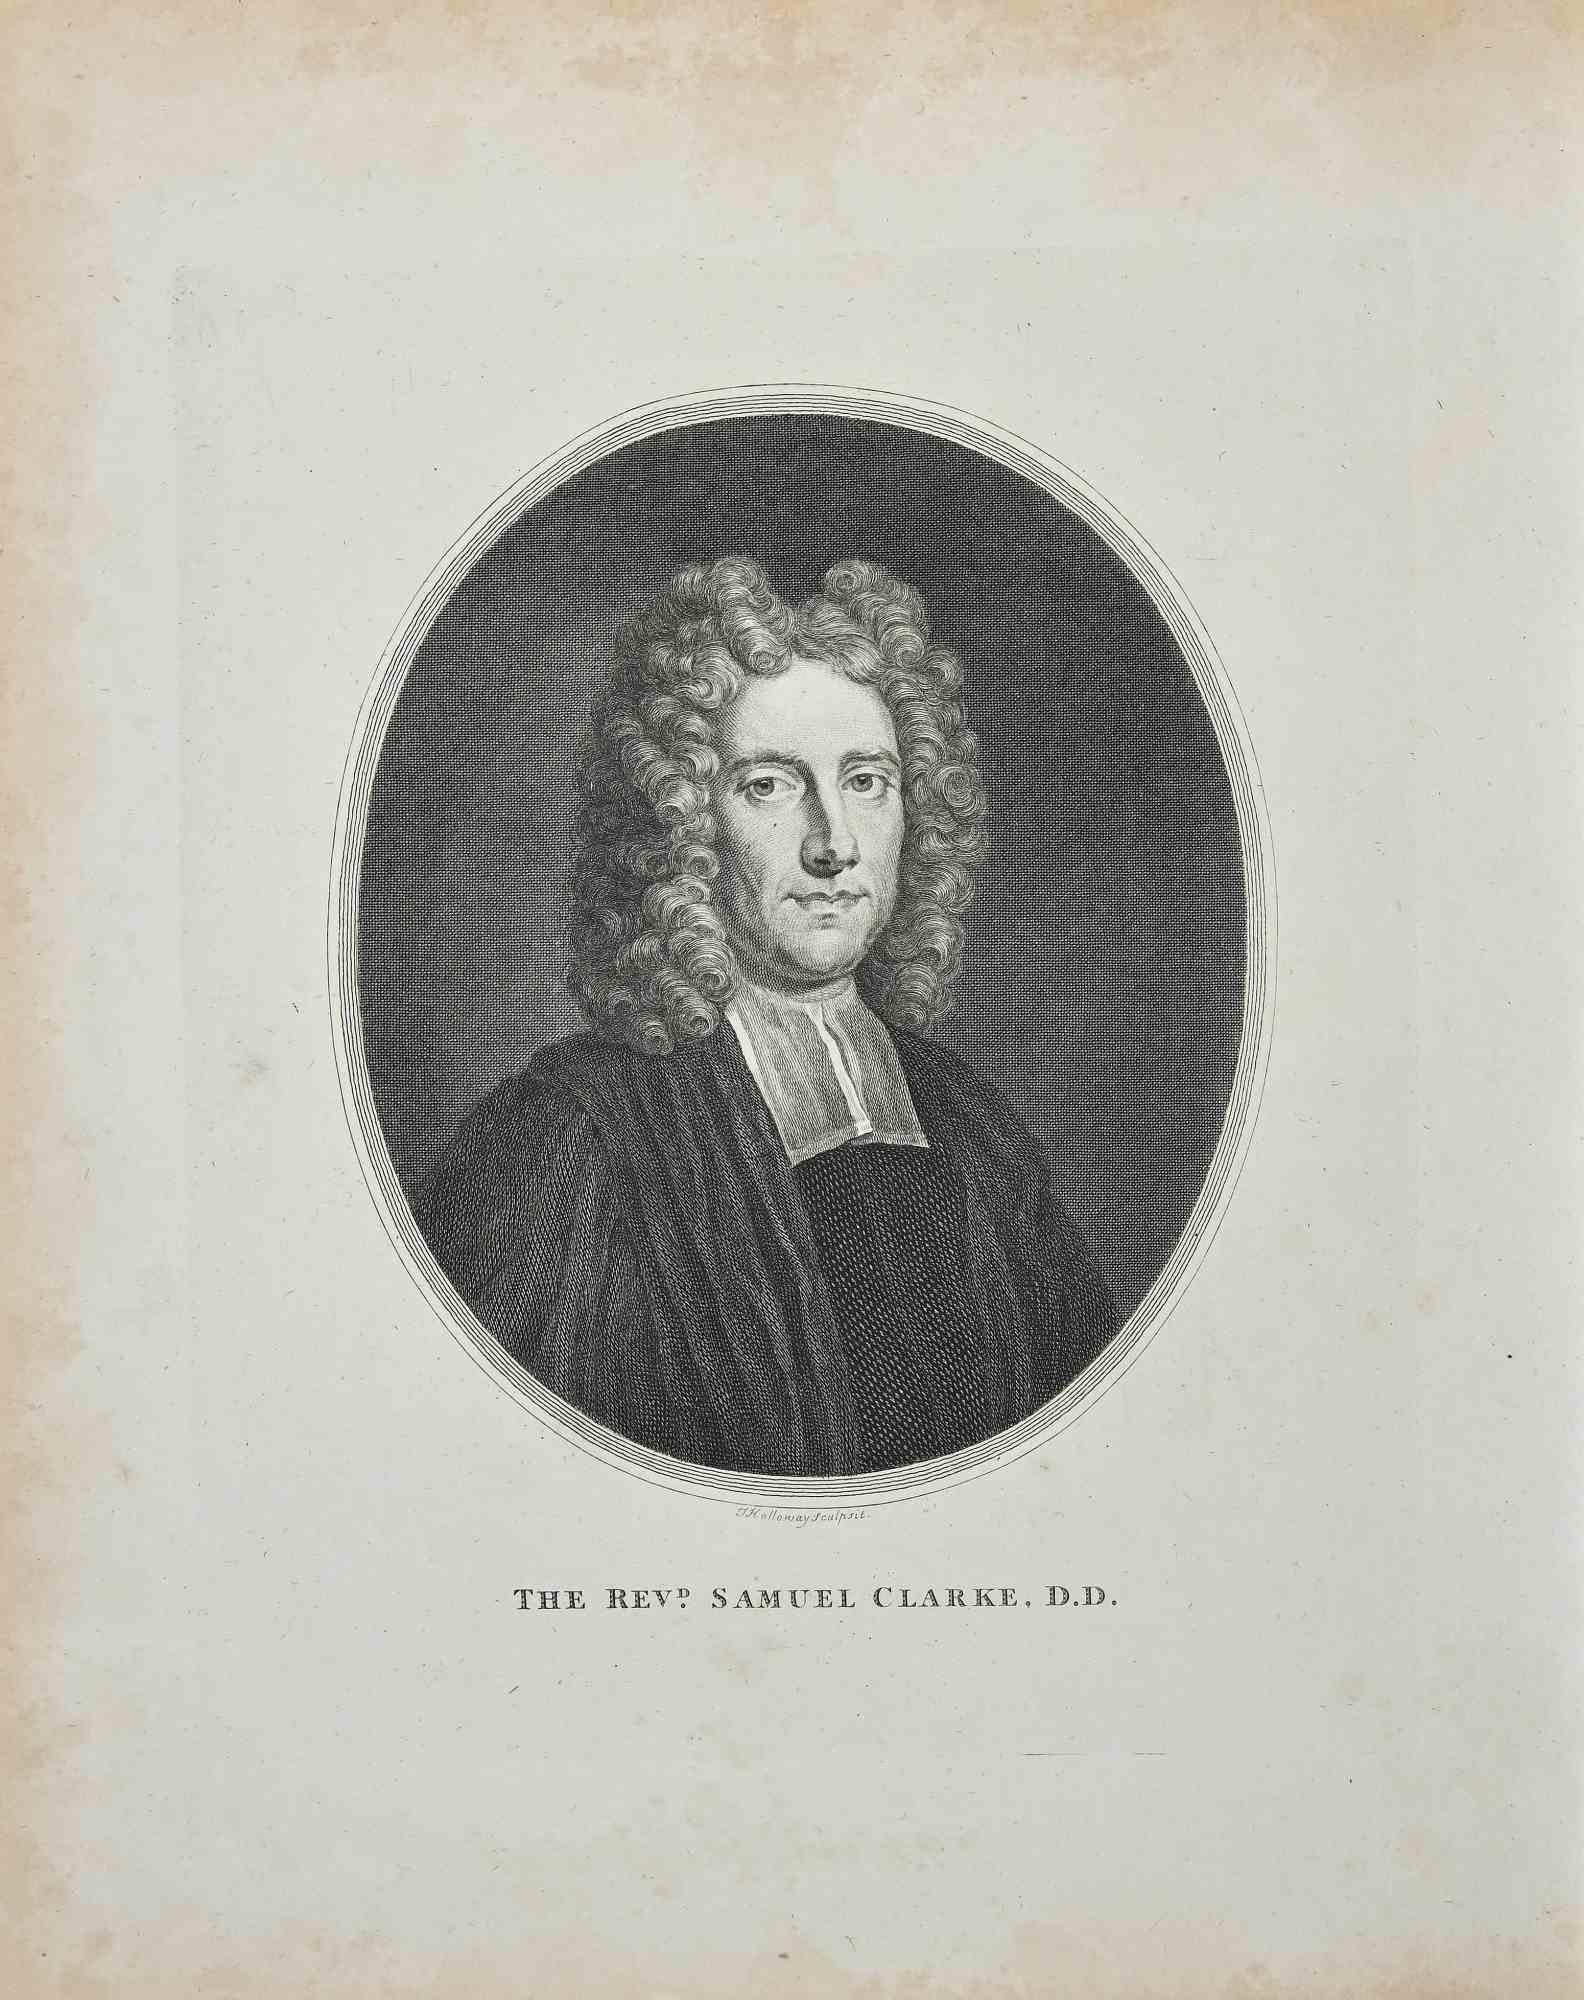 Portrait of Rev. Samuel Clarke. D.D. is an original etching artwork realized by Thomas Holloway for Johann Caspar Lavater's "Essays on Physiognomy, Designed to Promote the Knowledge and the Love of Mankind", London, Bensley, 1810. 

Signed on the